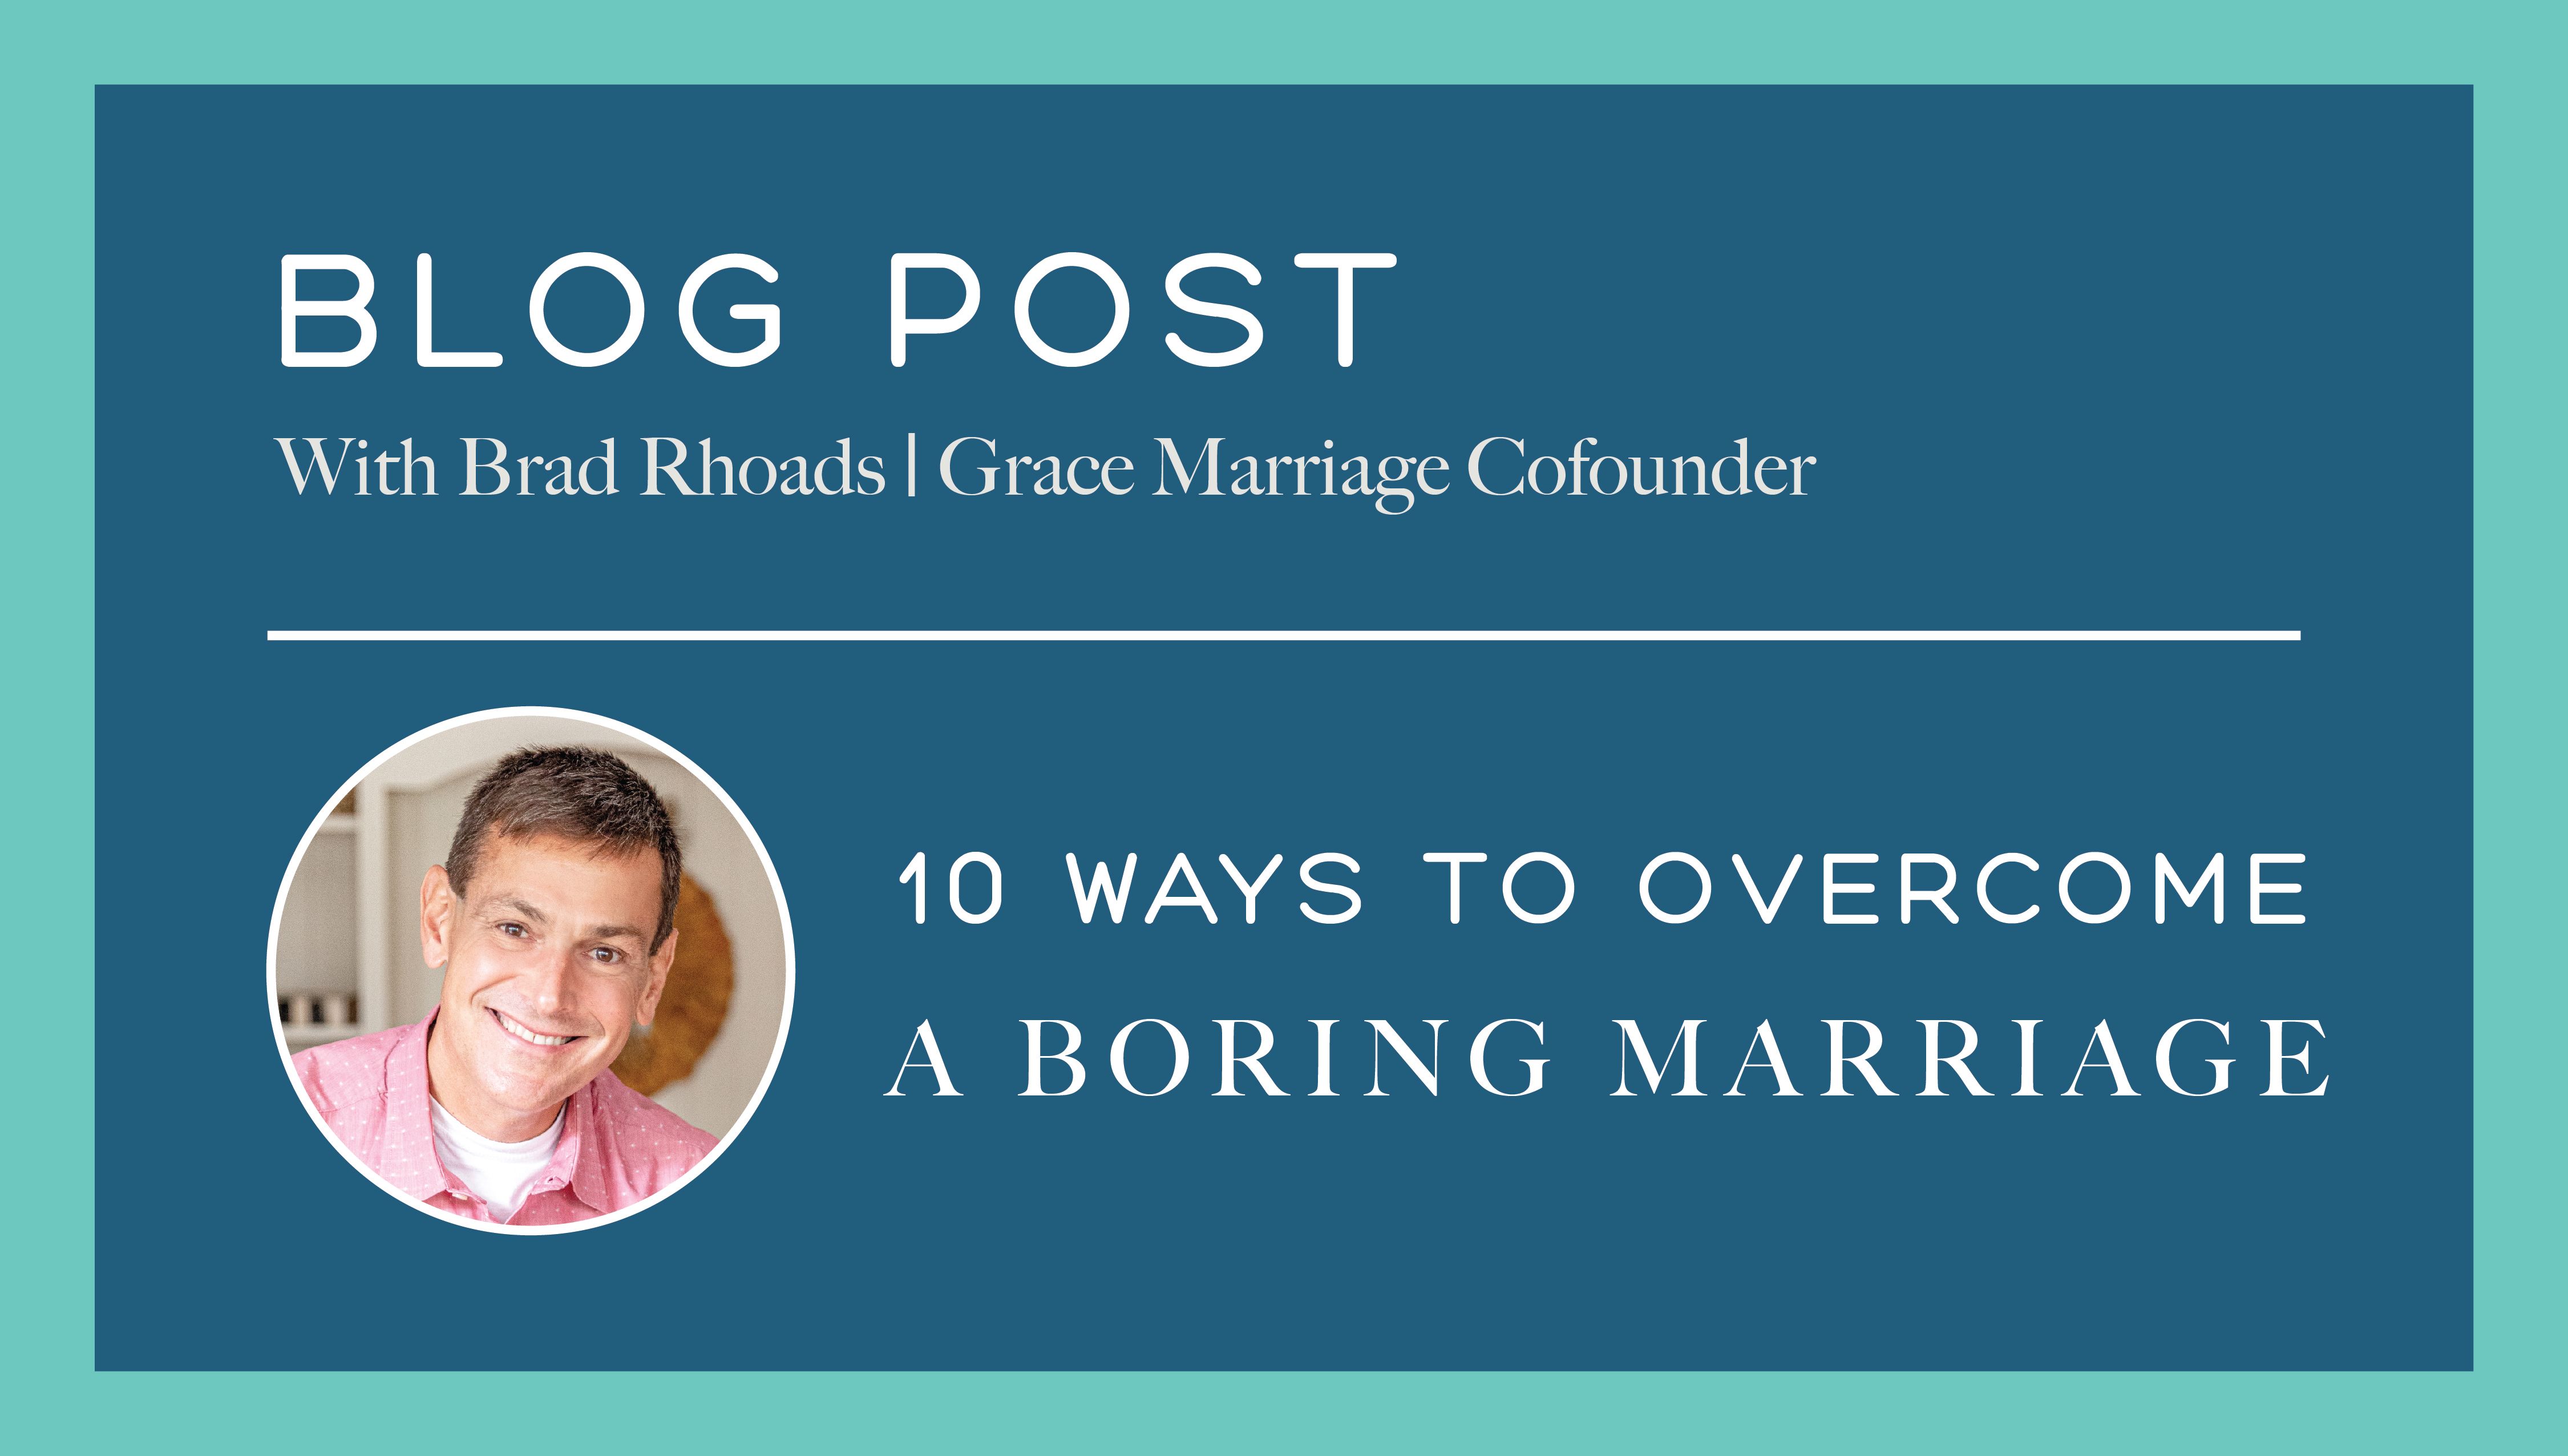 10 Ways to Overcome a Boring Marriage